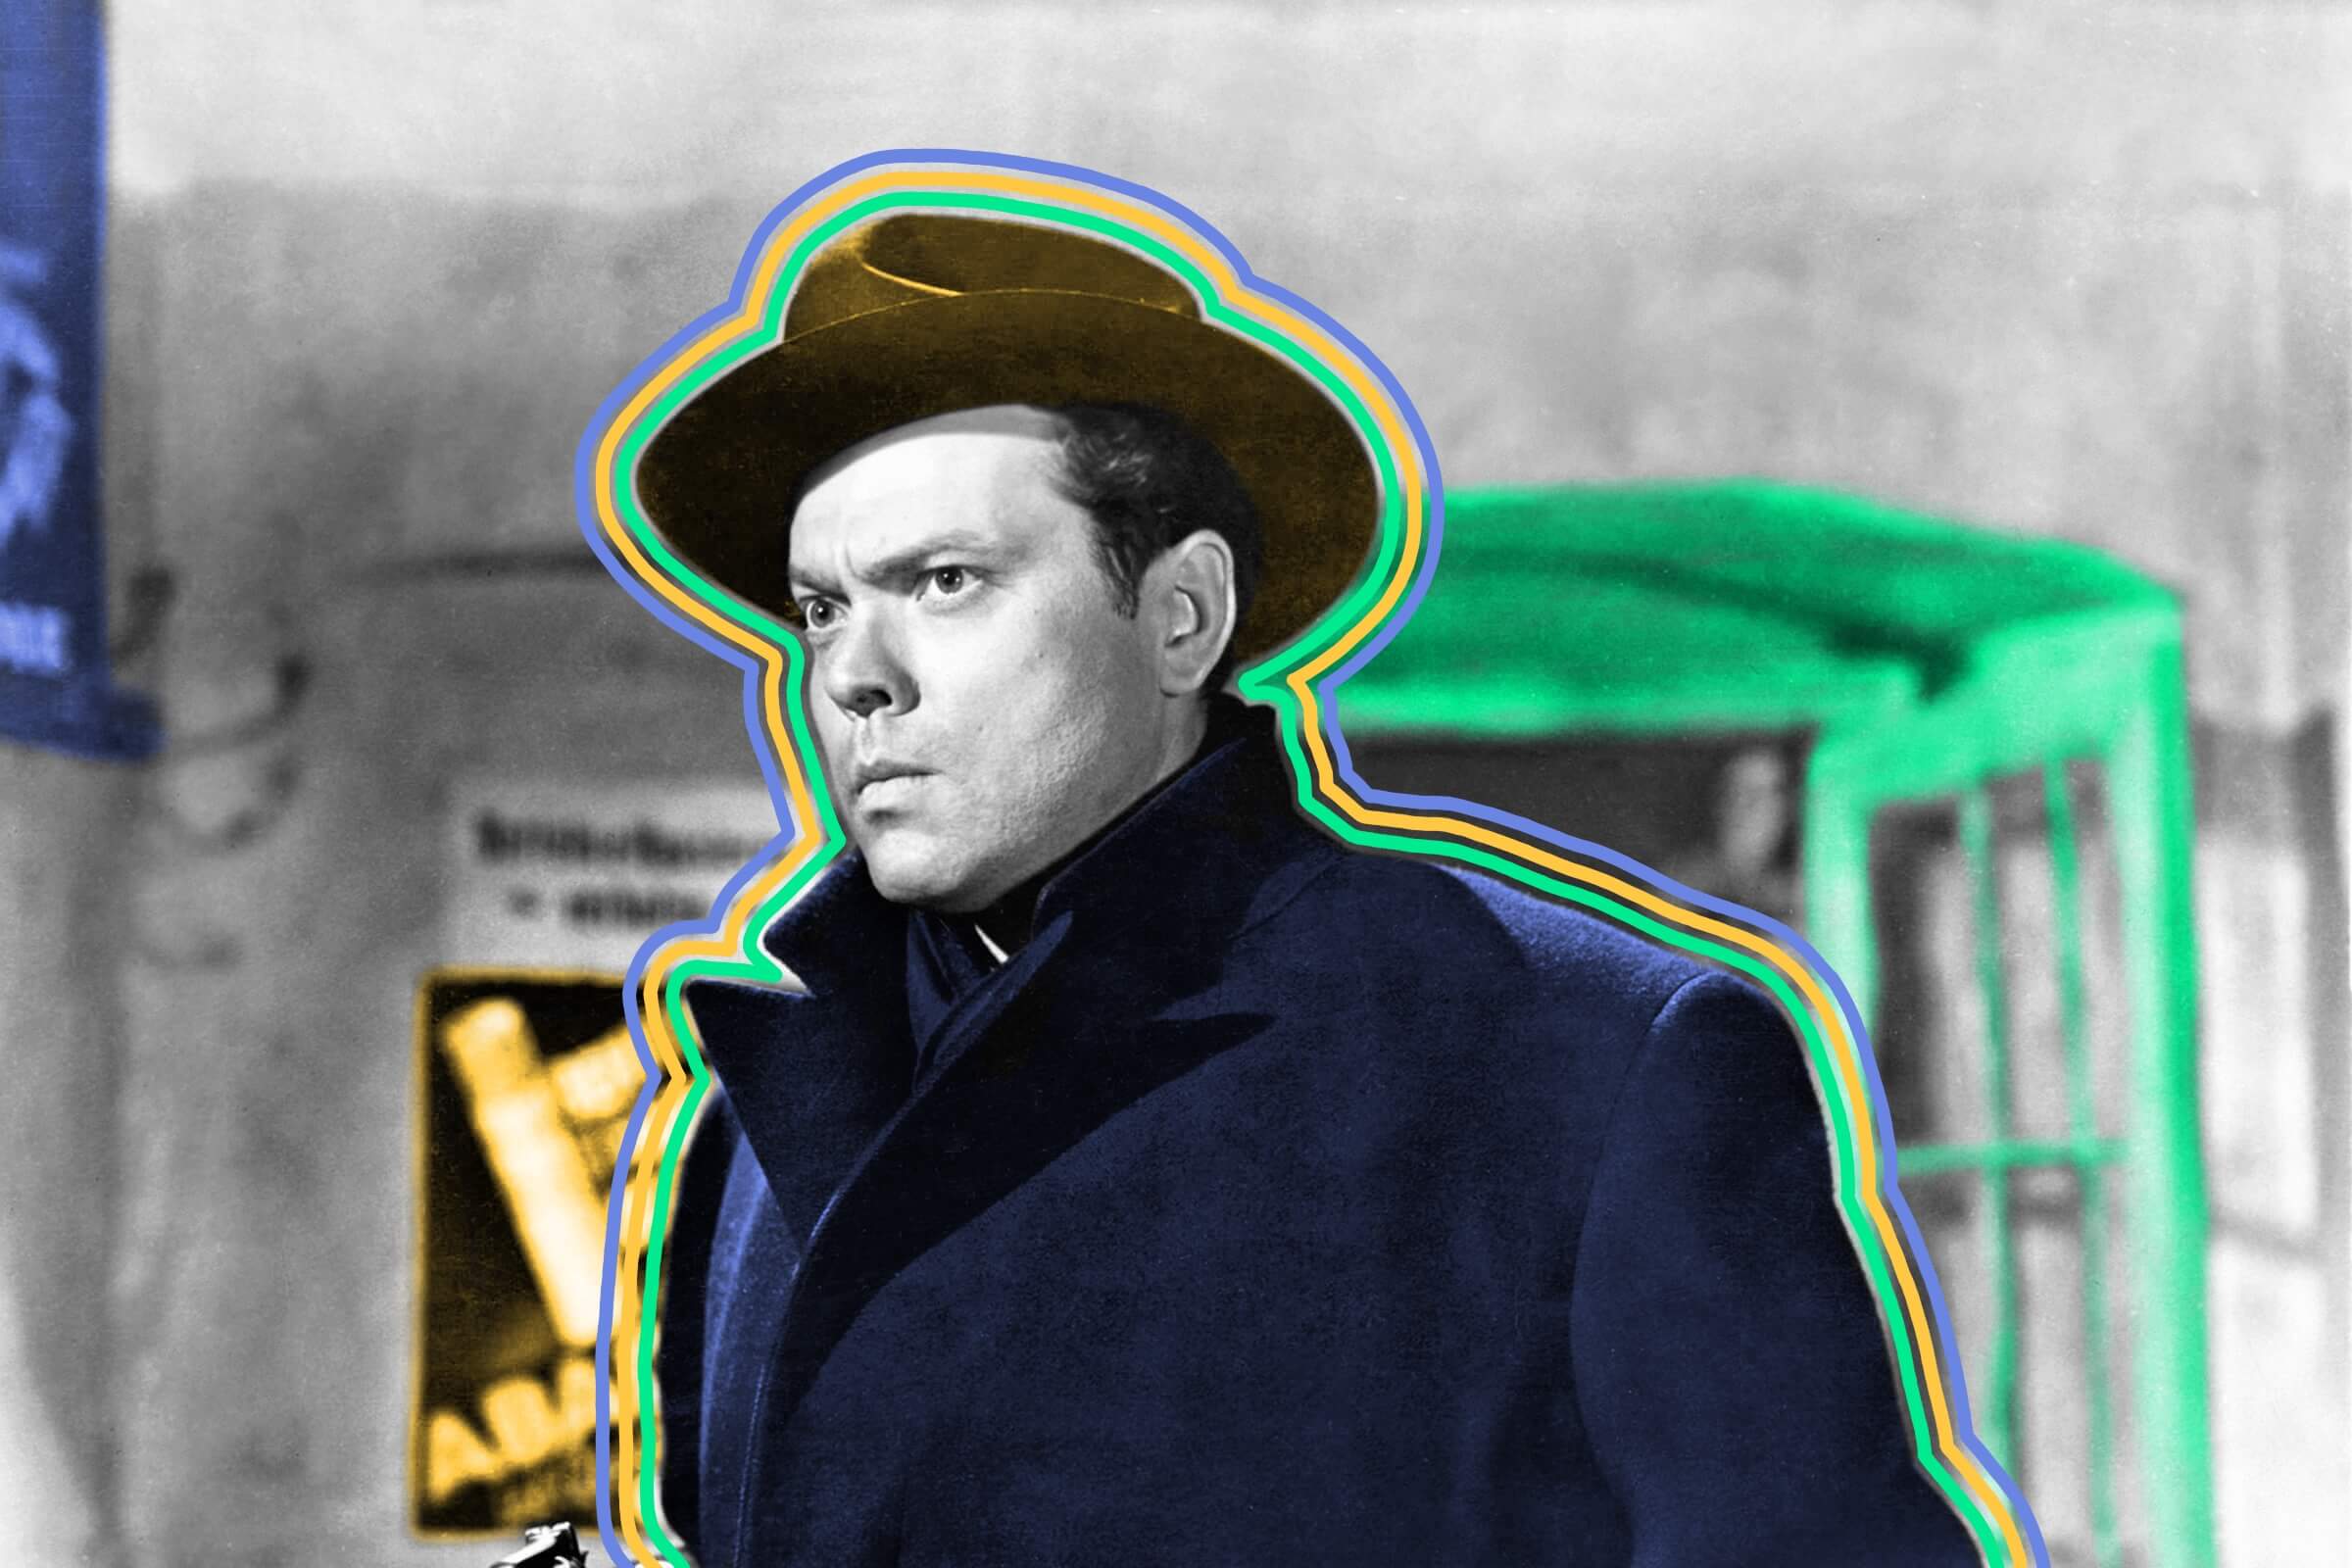 There’s a genus of spiders named after Orson Welles.